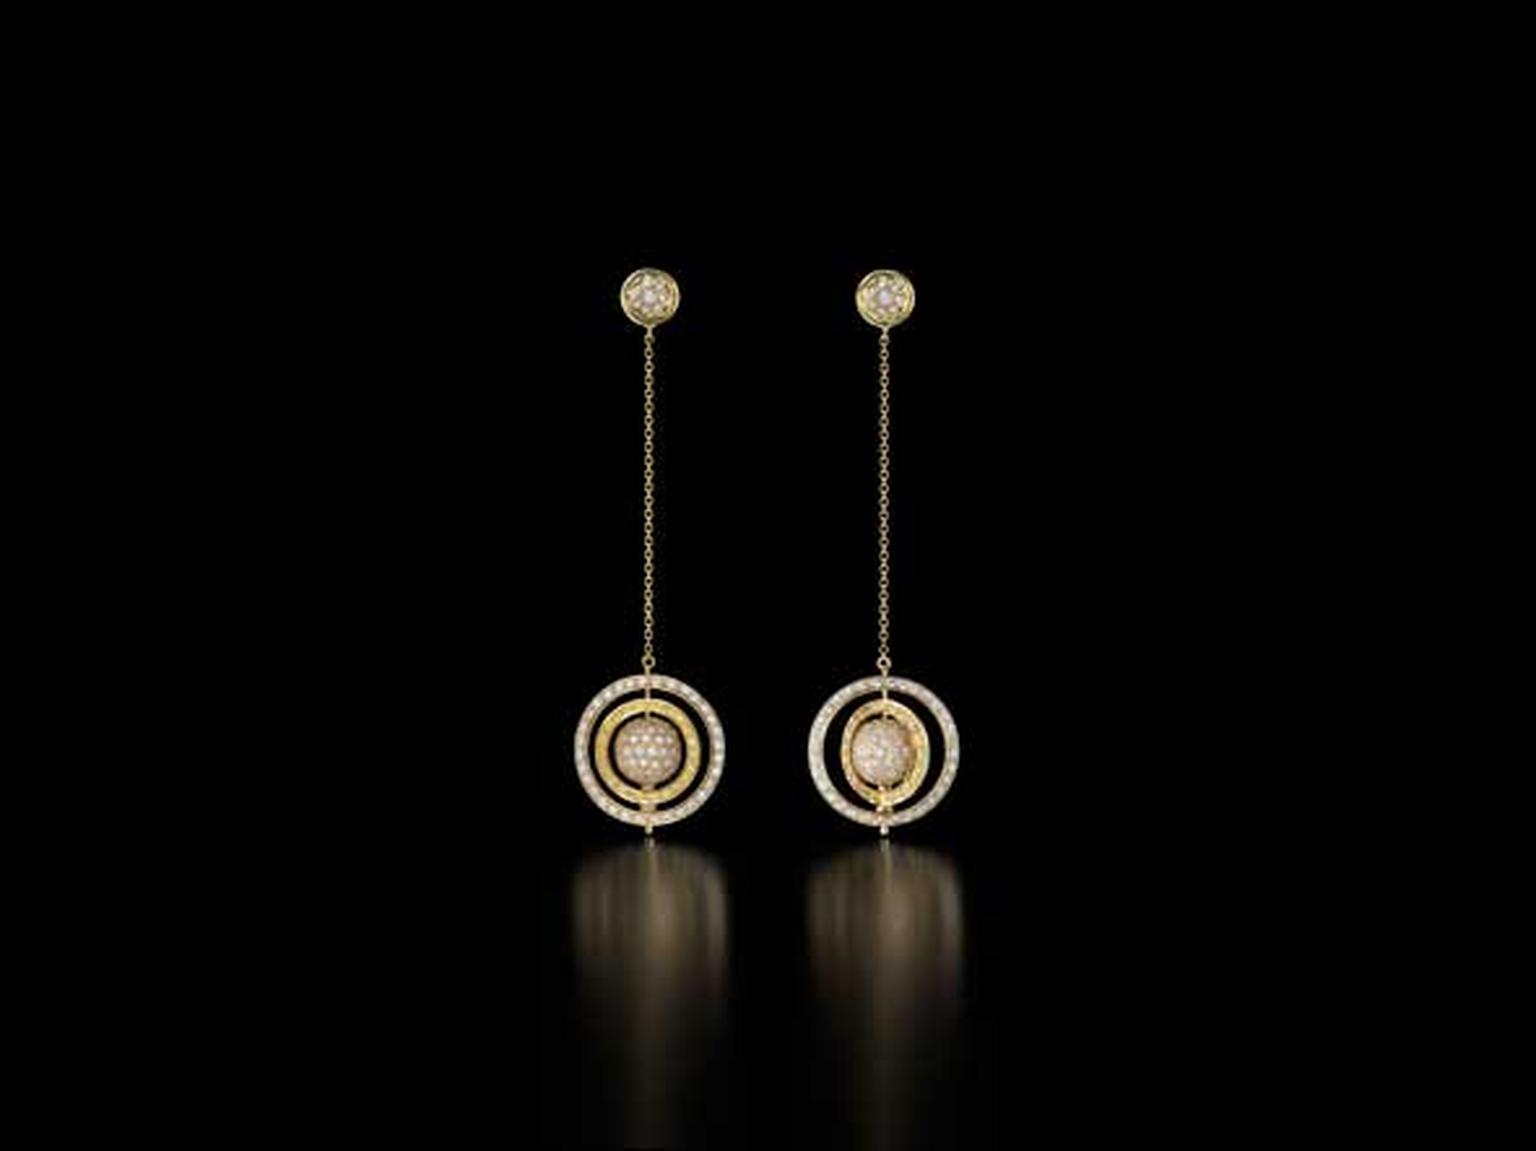 The Spinning Orb earrings in gold with yellow and white pavé diamonds from Liv Ballard.